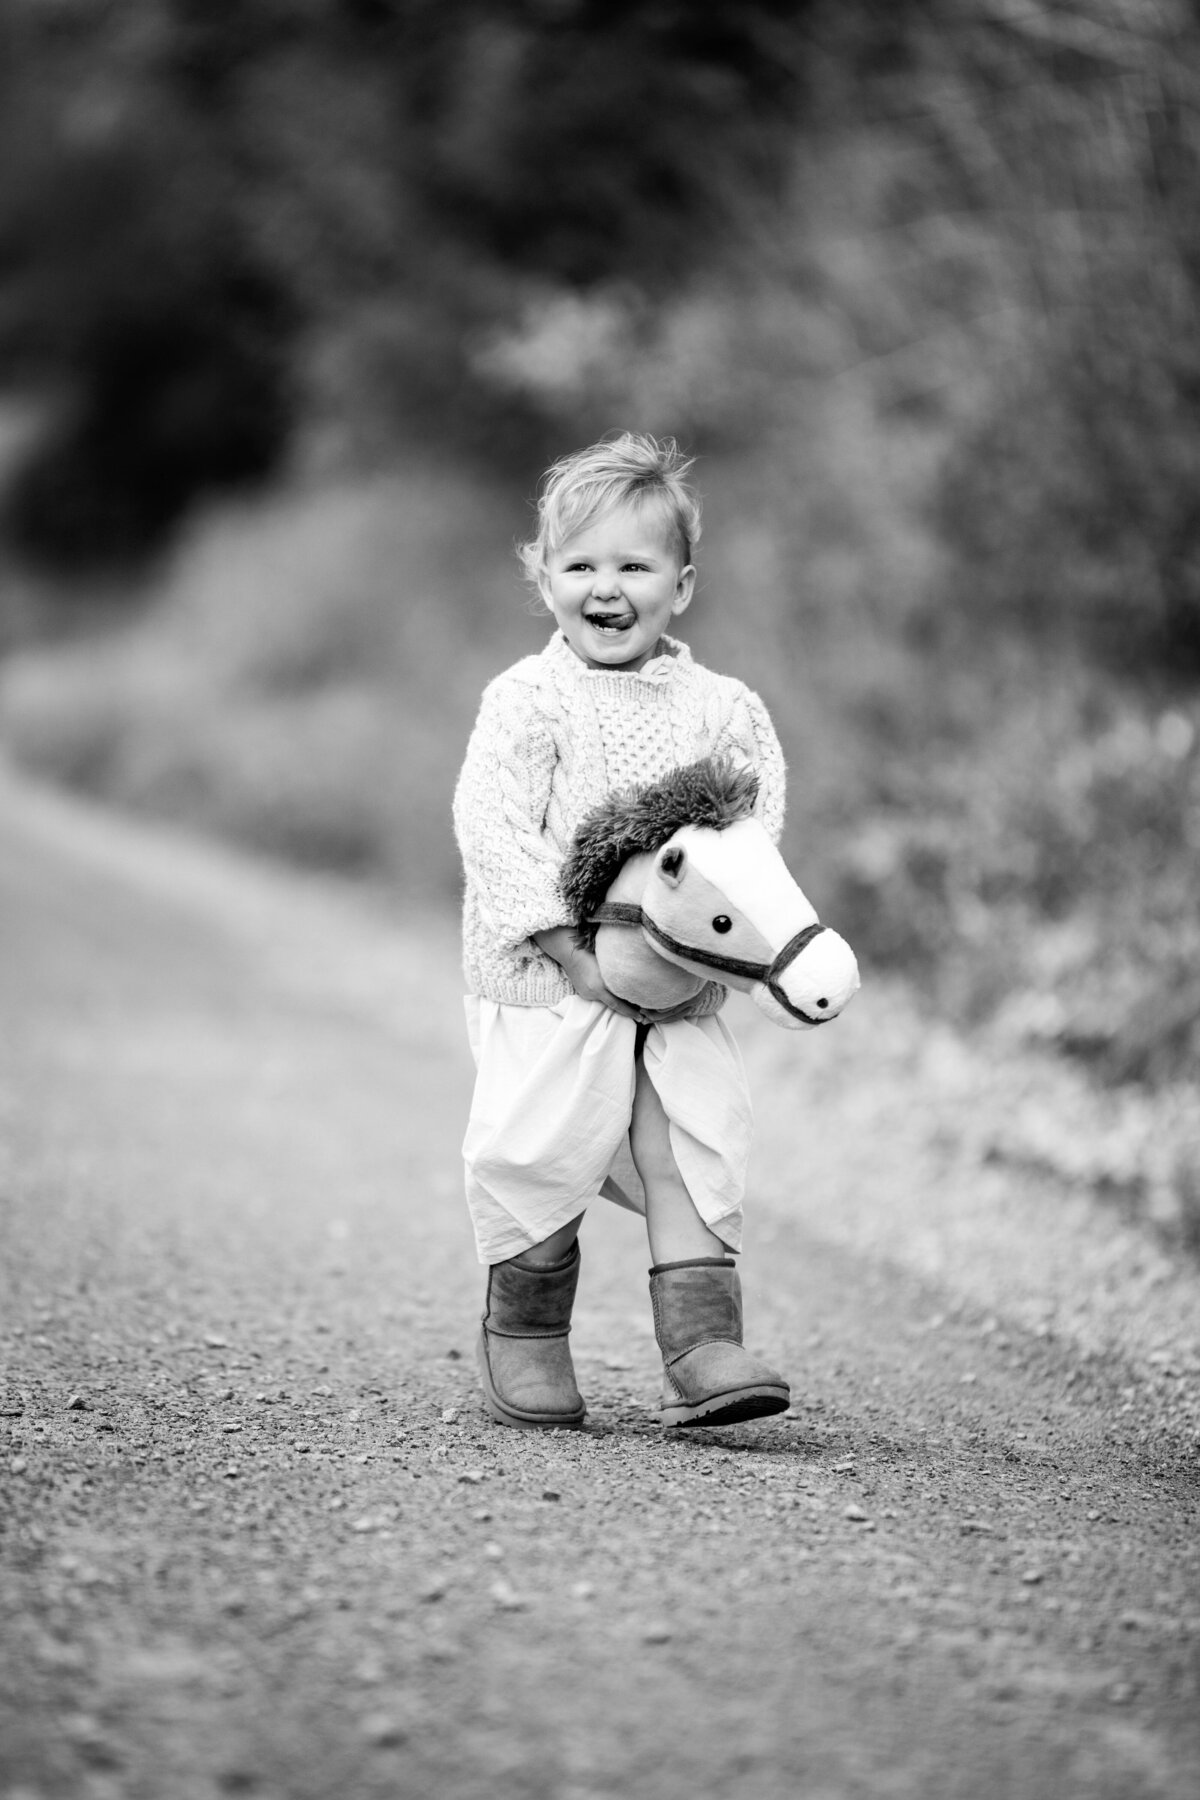 Child laughing with toy horse